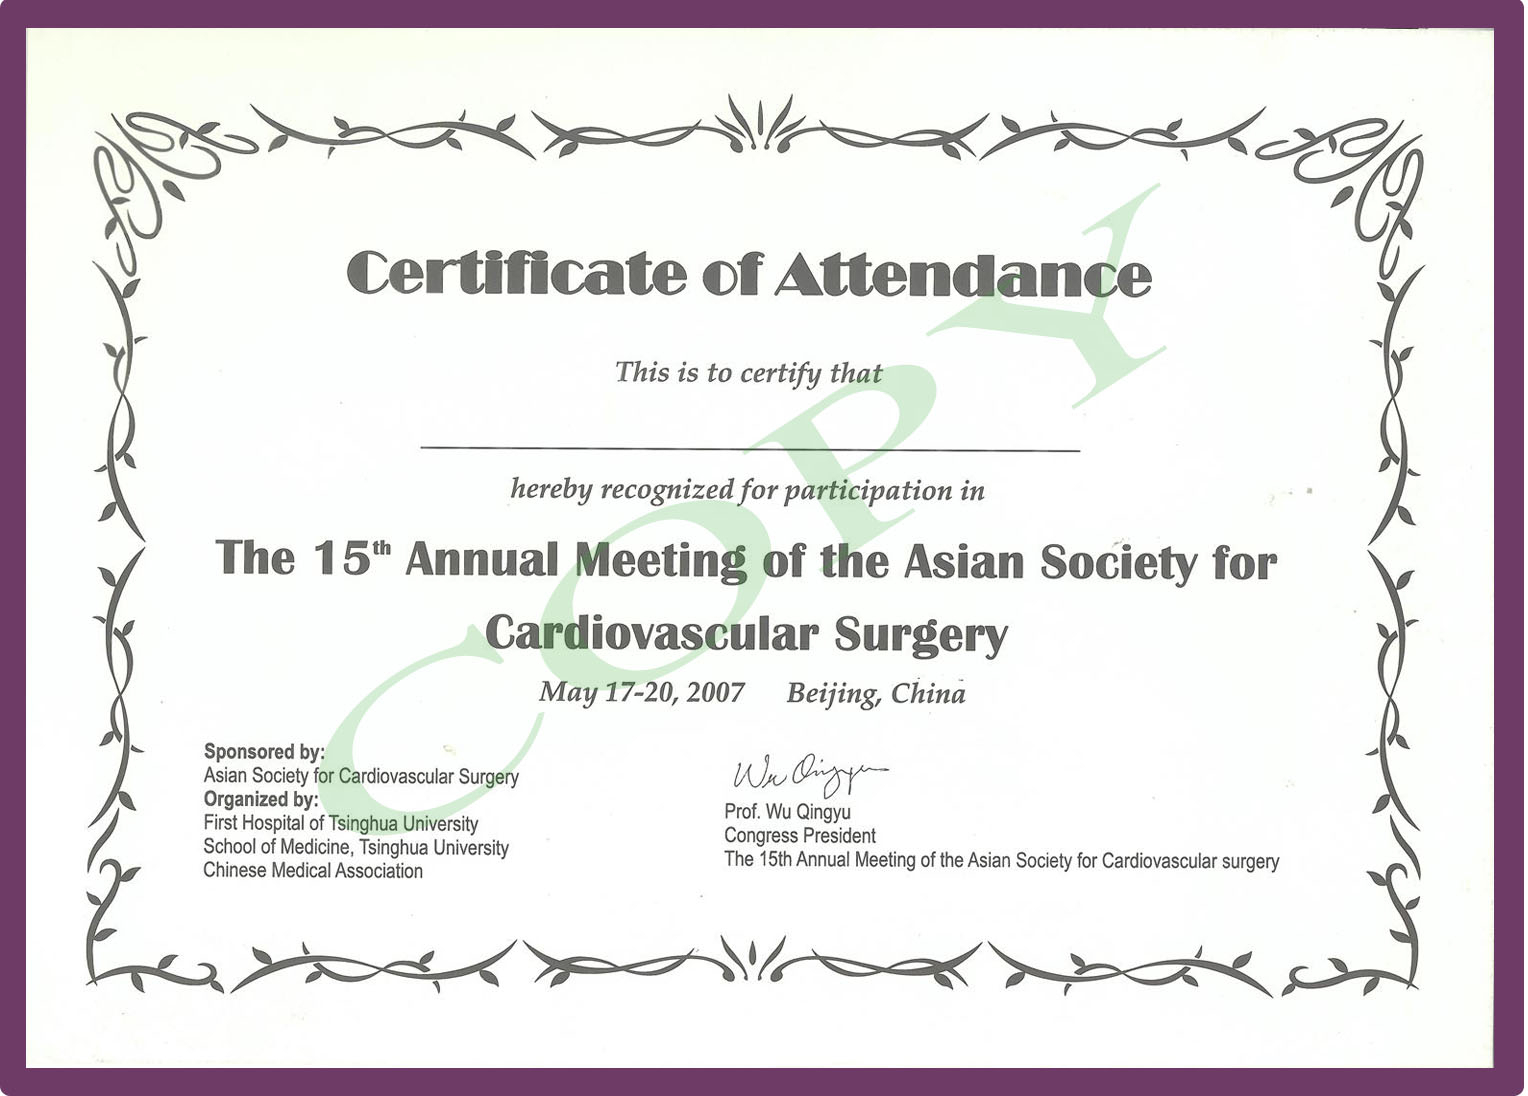 Certificate Templates: Continued Medical Edeucation In Certificate Of Attendance Conference Template